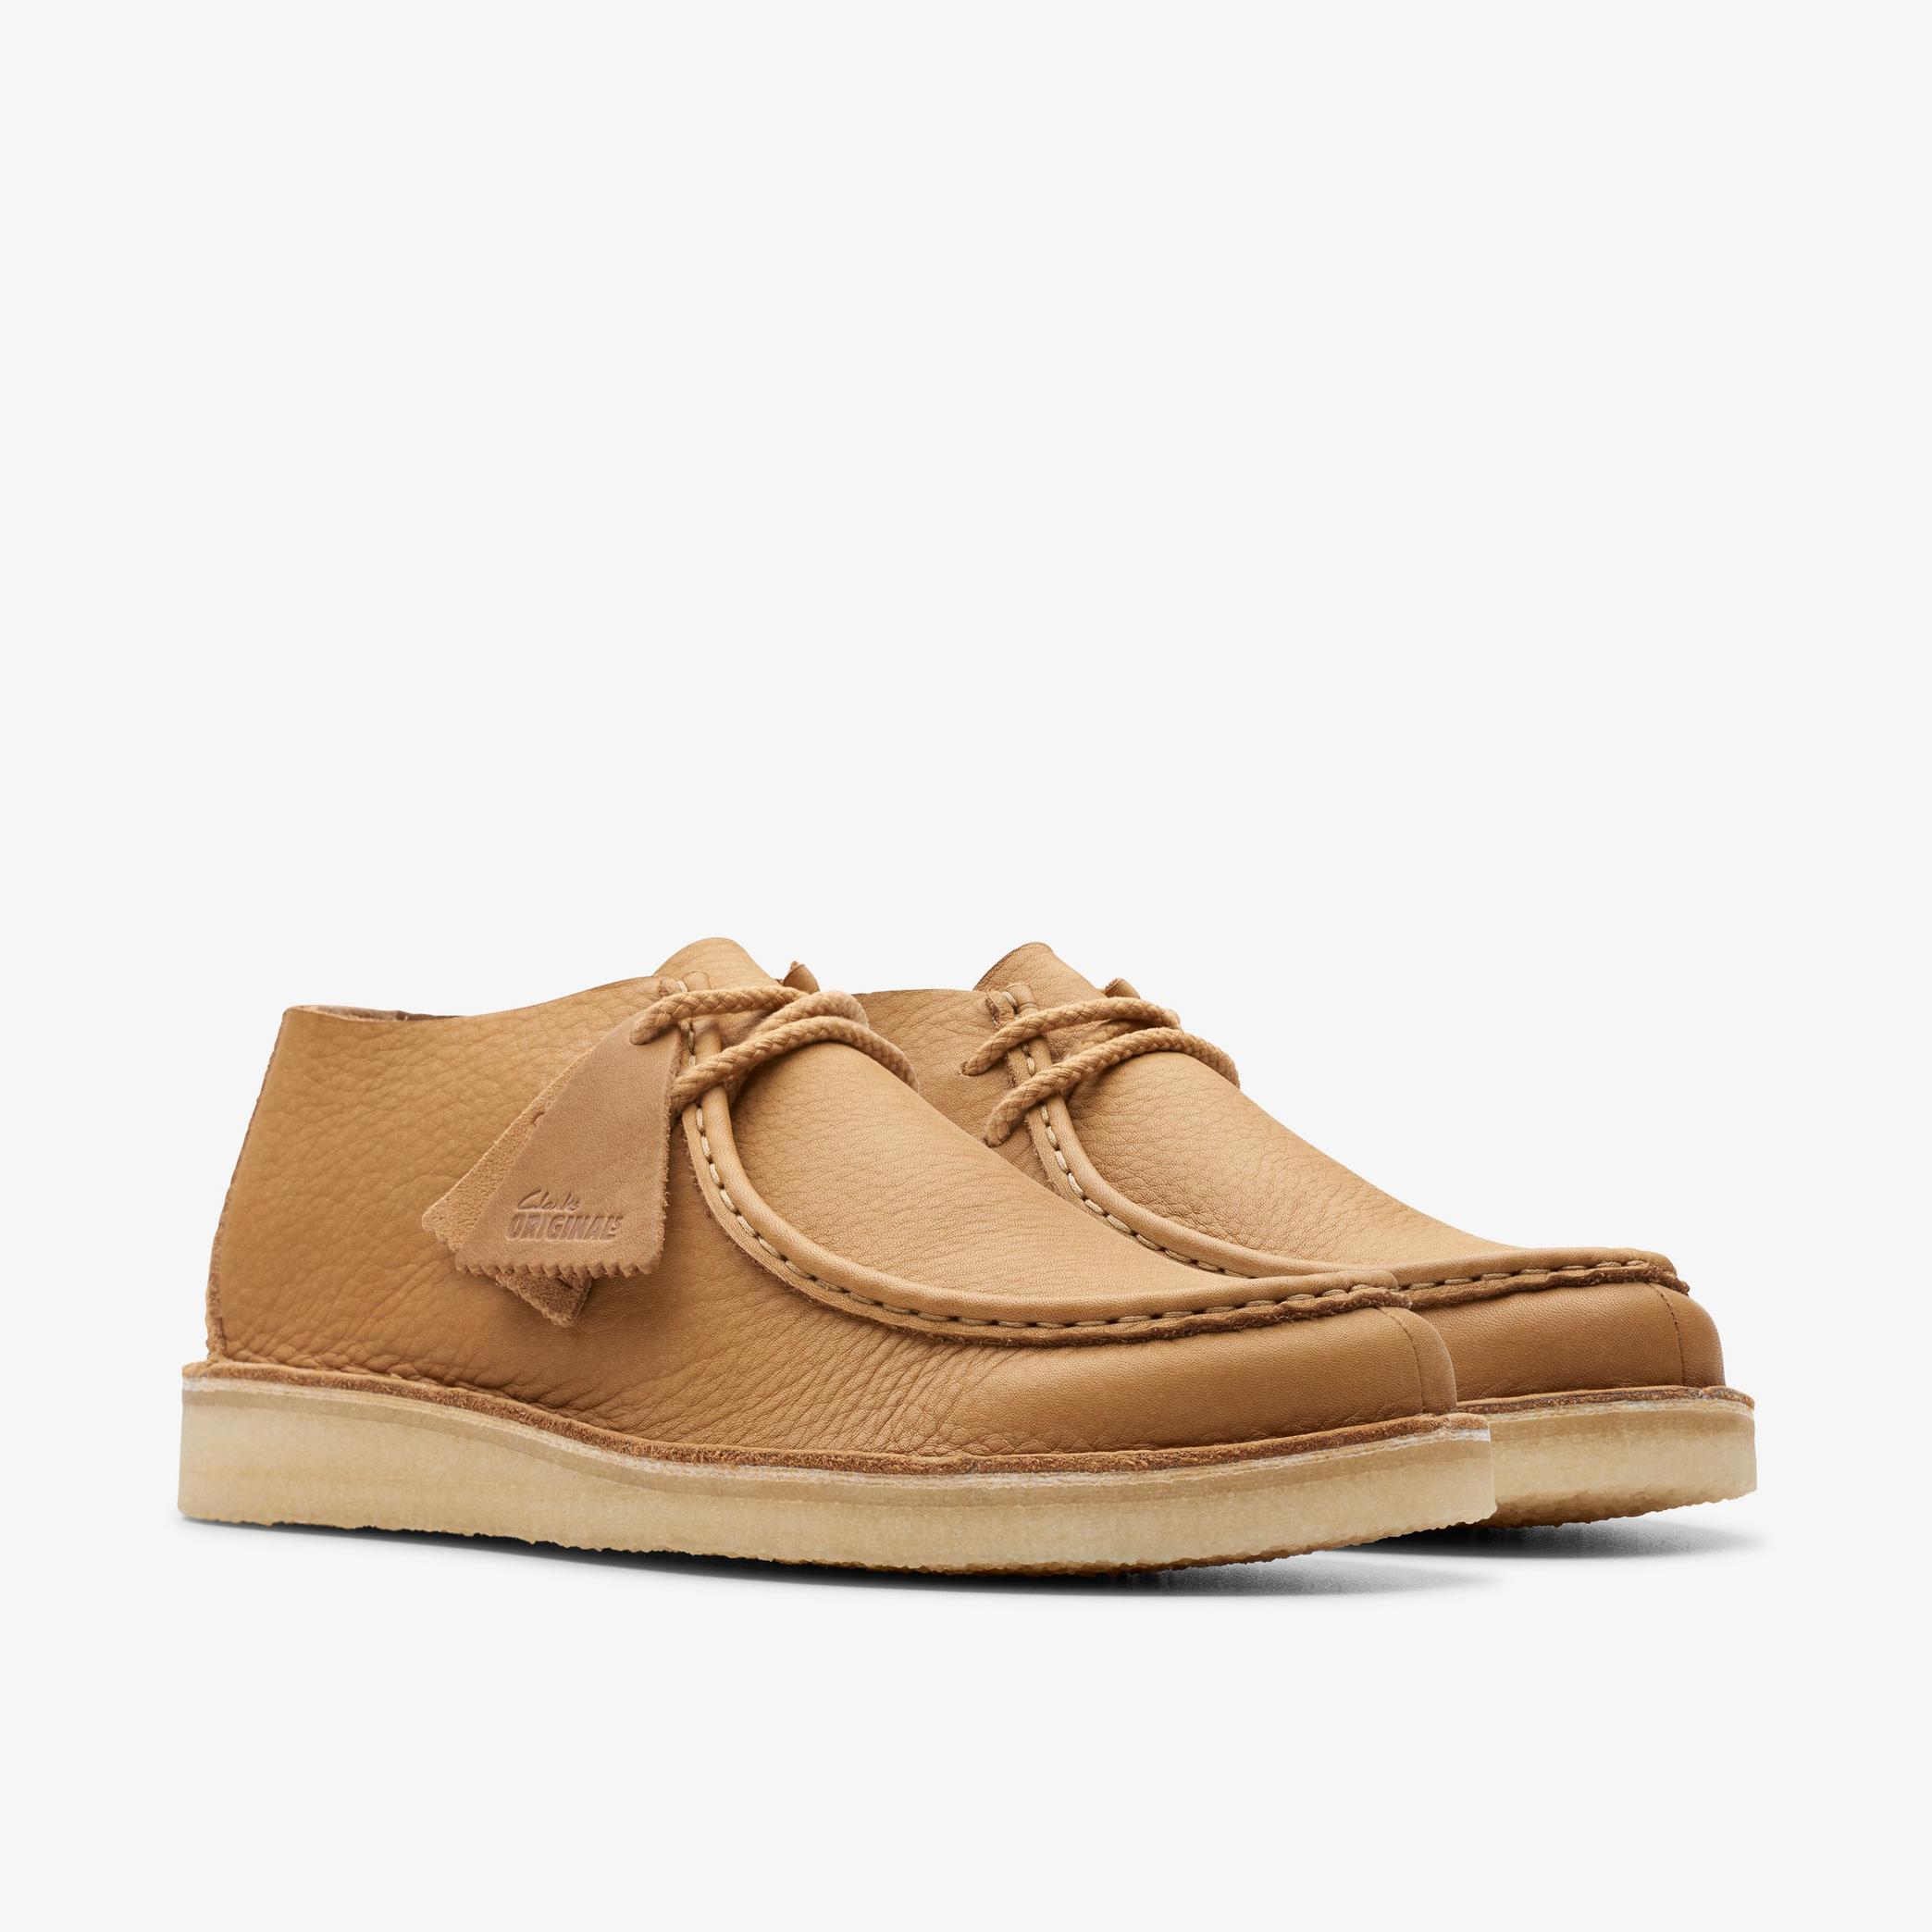 Desert Nomad Mid Tan Leather Moccasins, view 4 of 6